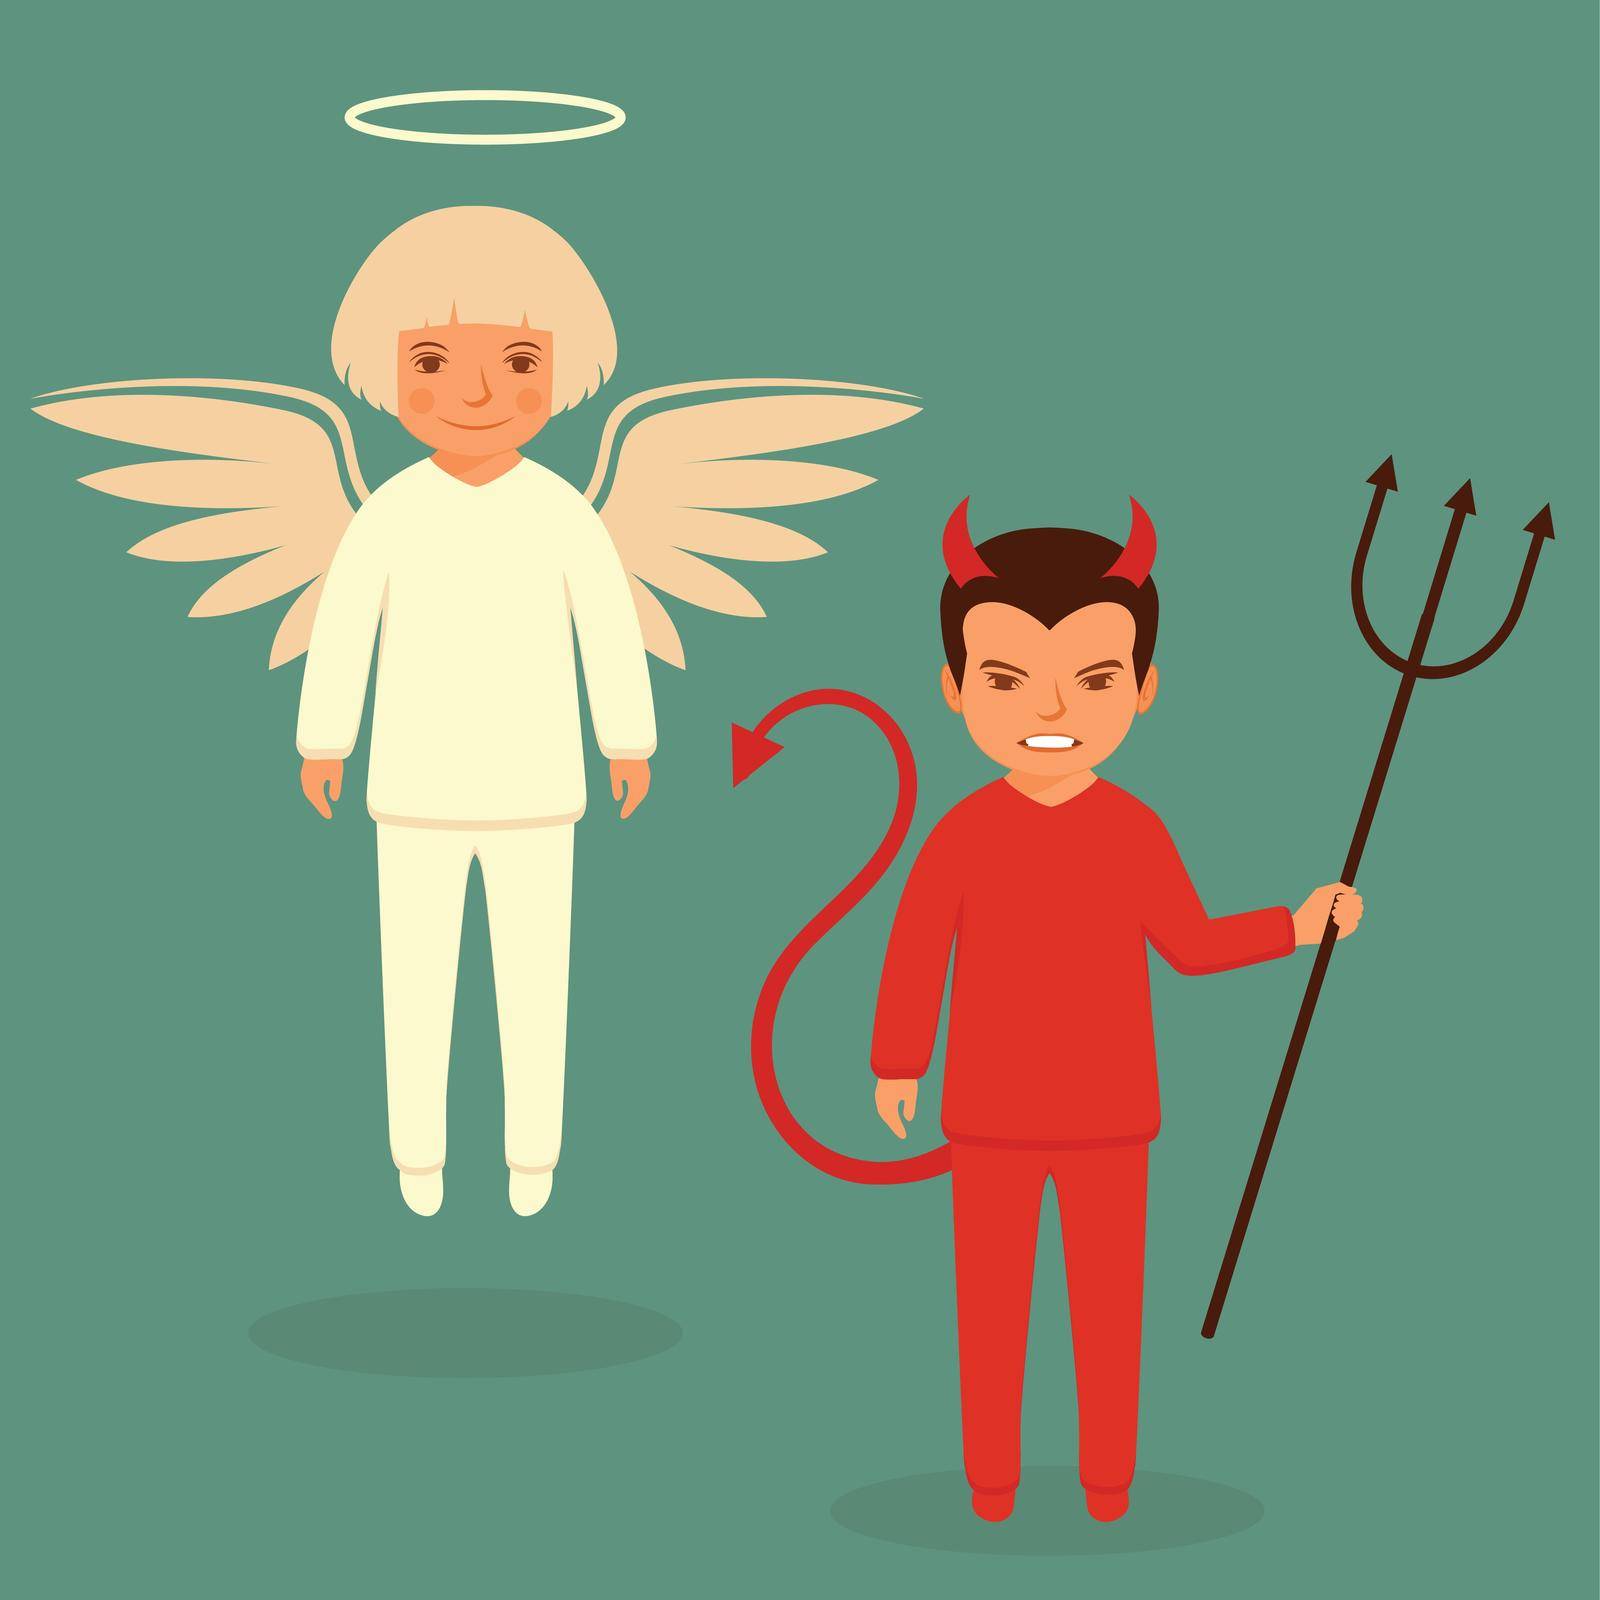 devil and angel, cartoon vector illustration, good and bad character